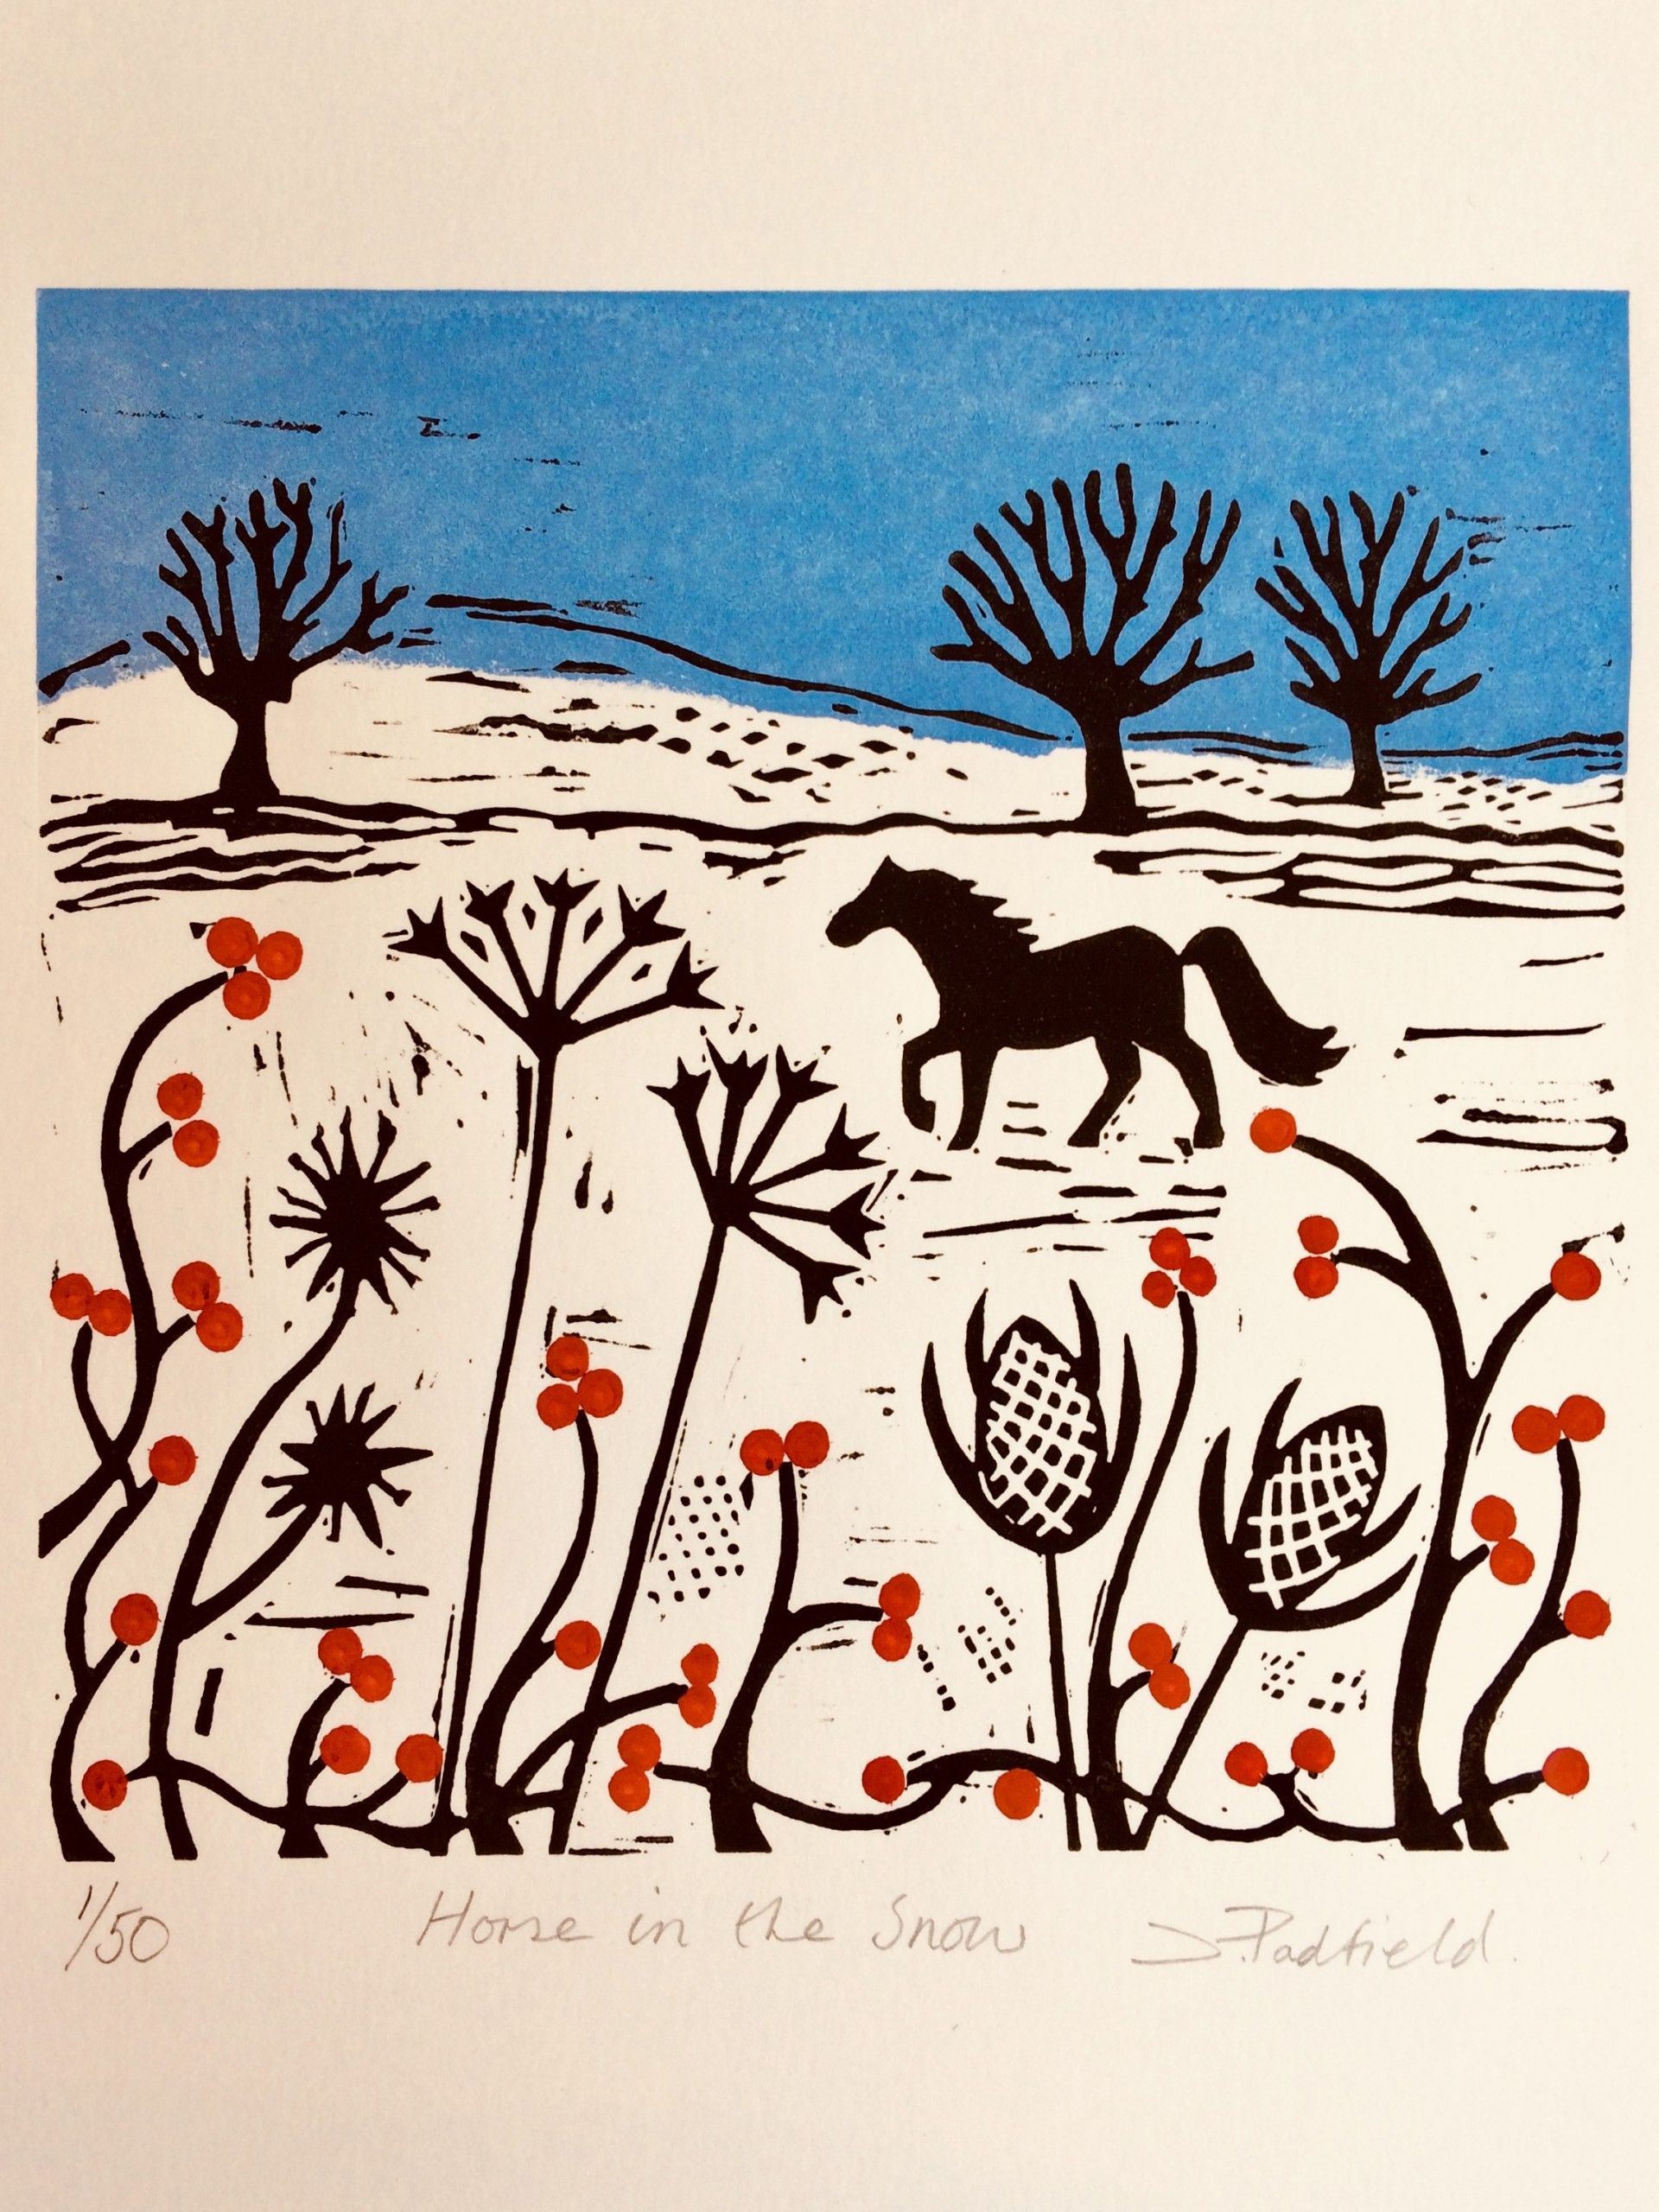 Horse in the snow by Joanna Padfield